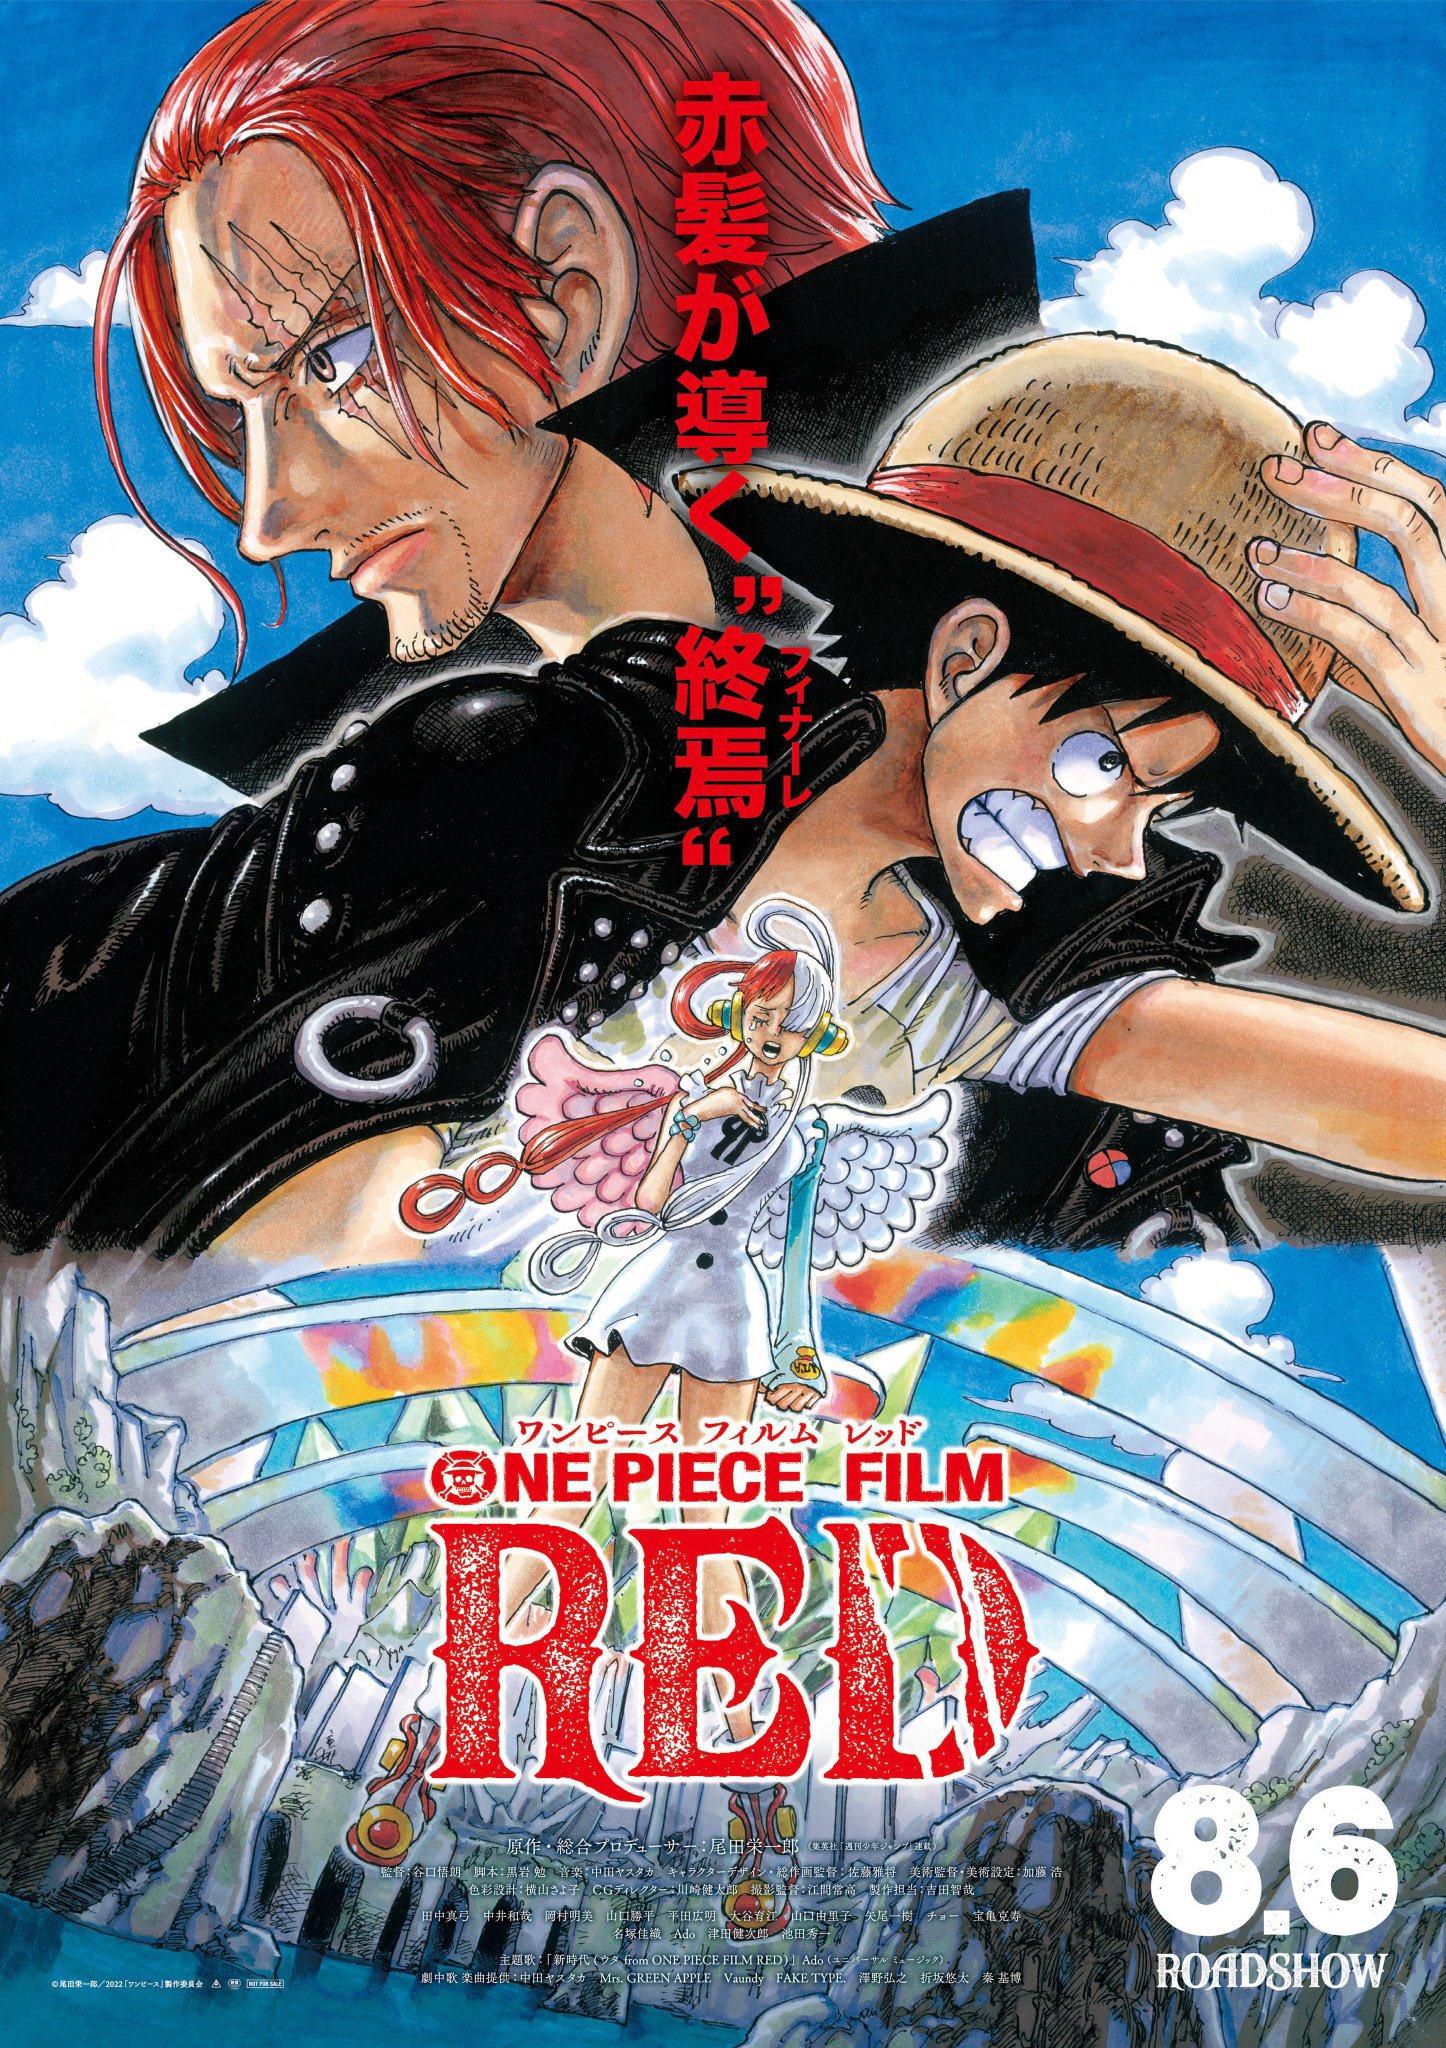 One Piece to go on month-long hiatus as the final saga approaches